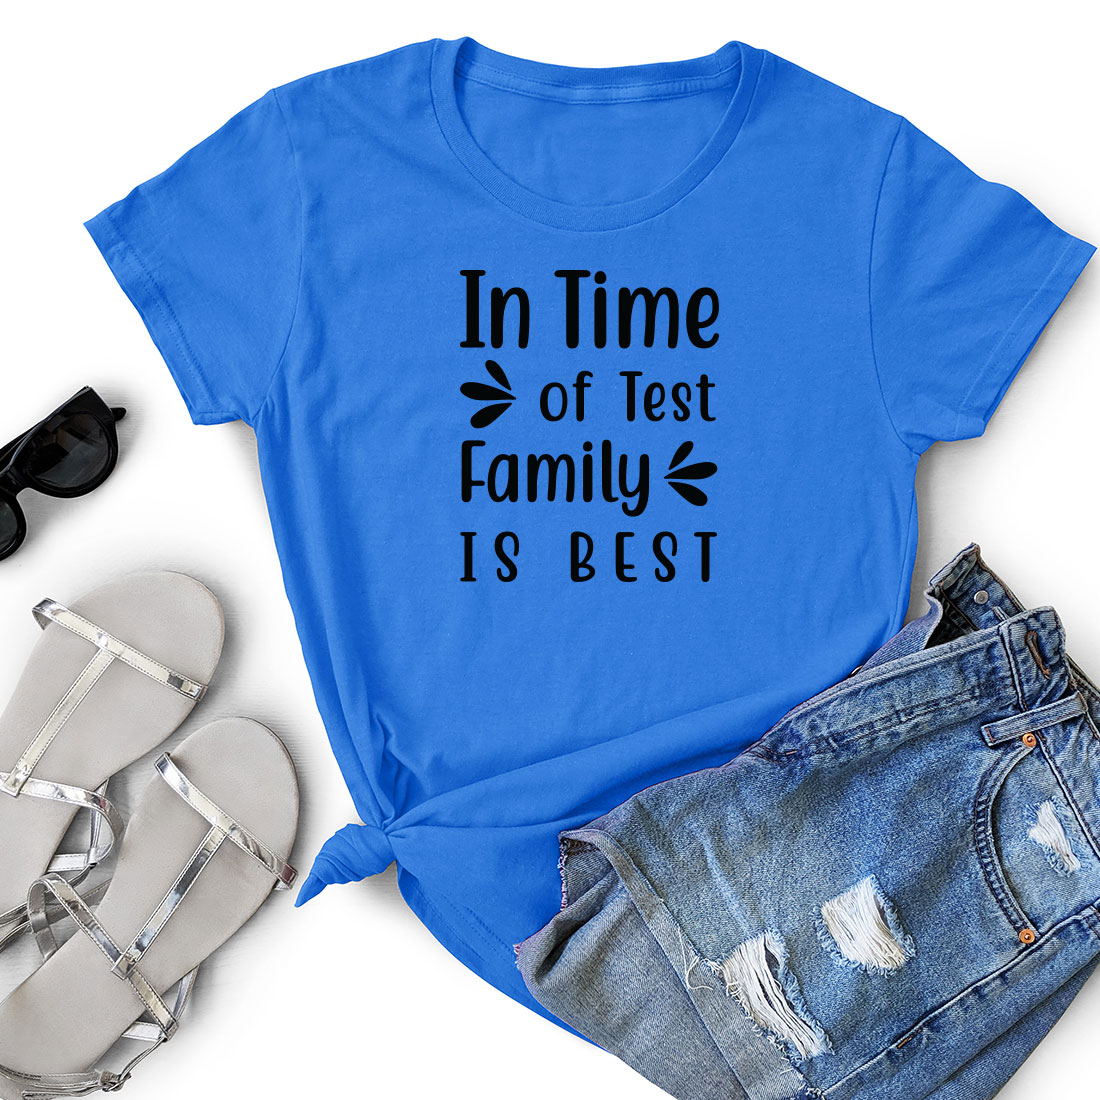 T - shirt that says in time of test family is best.